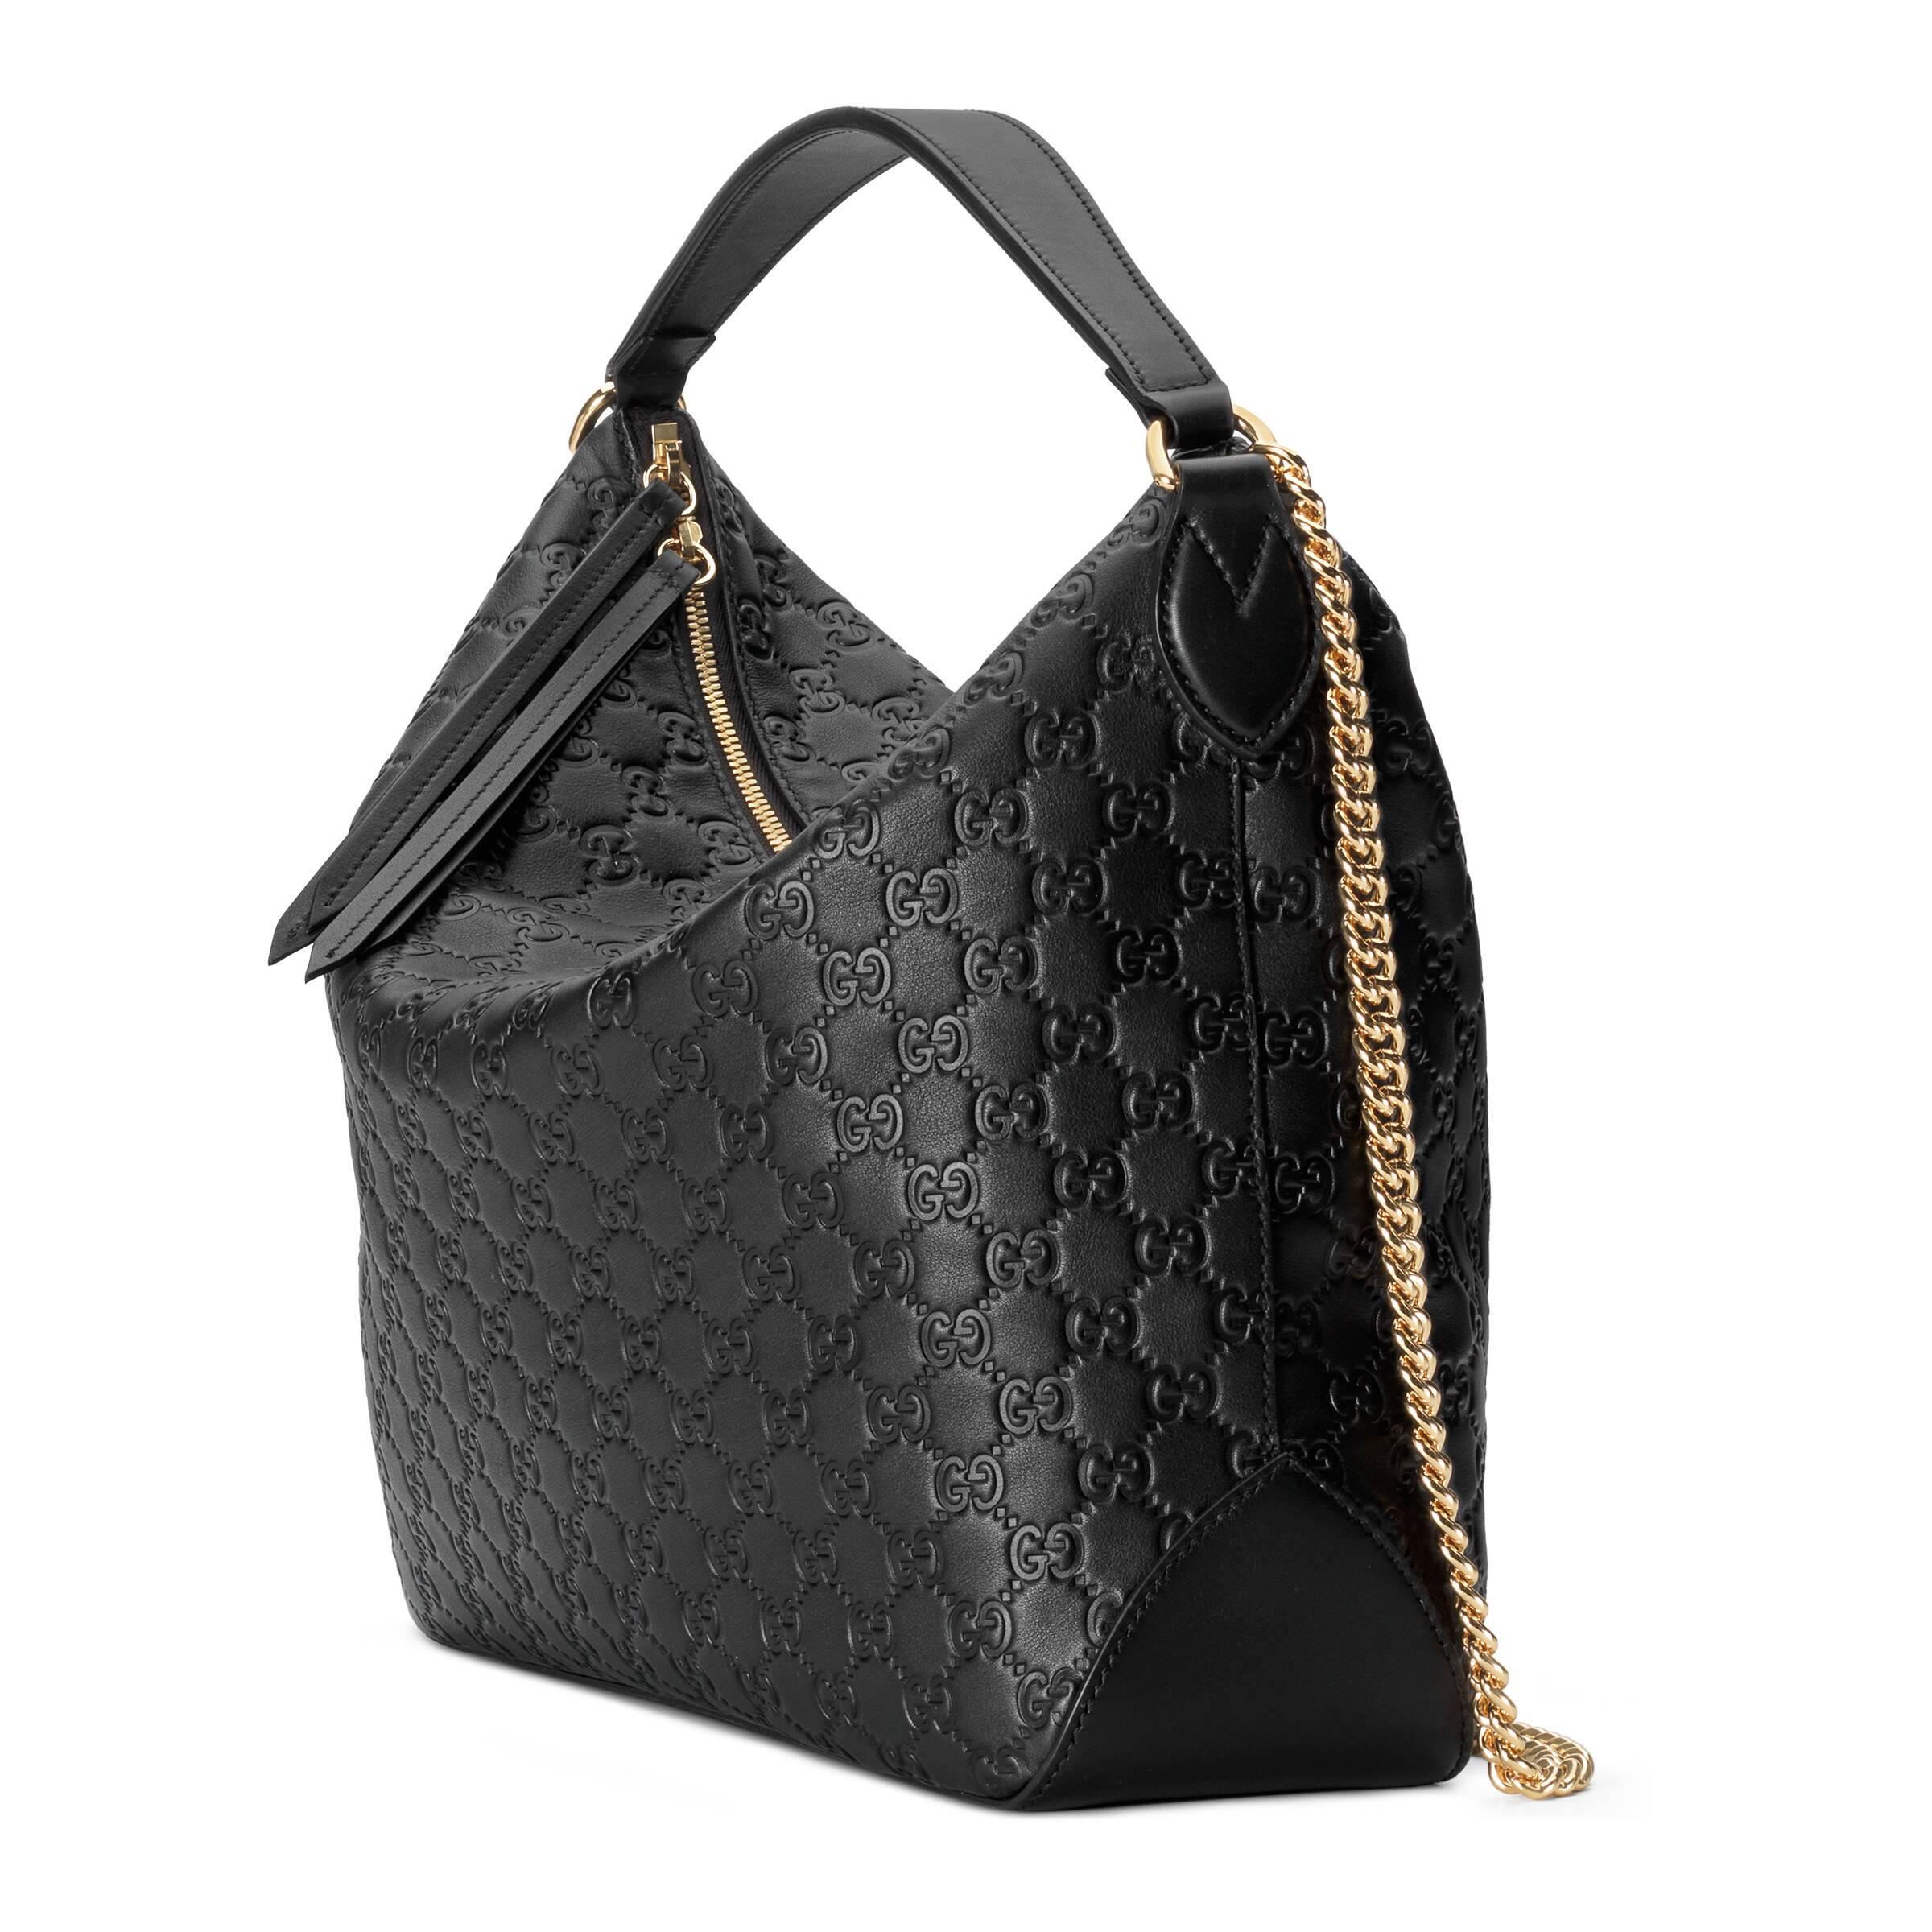 Gucci Large Hobo Handbags Online Sale, UP TO 60% OFF